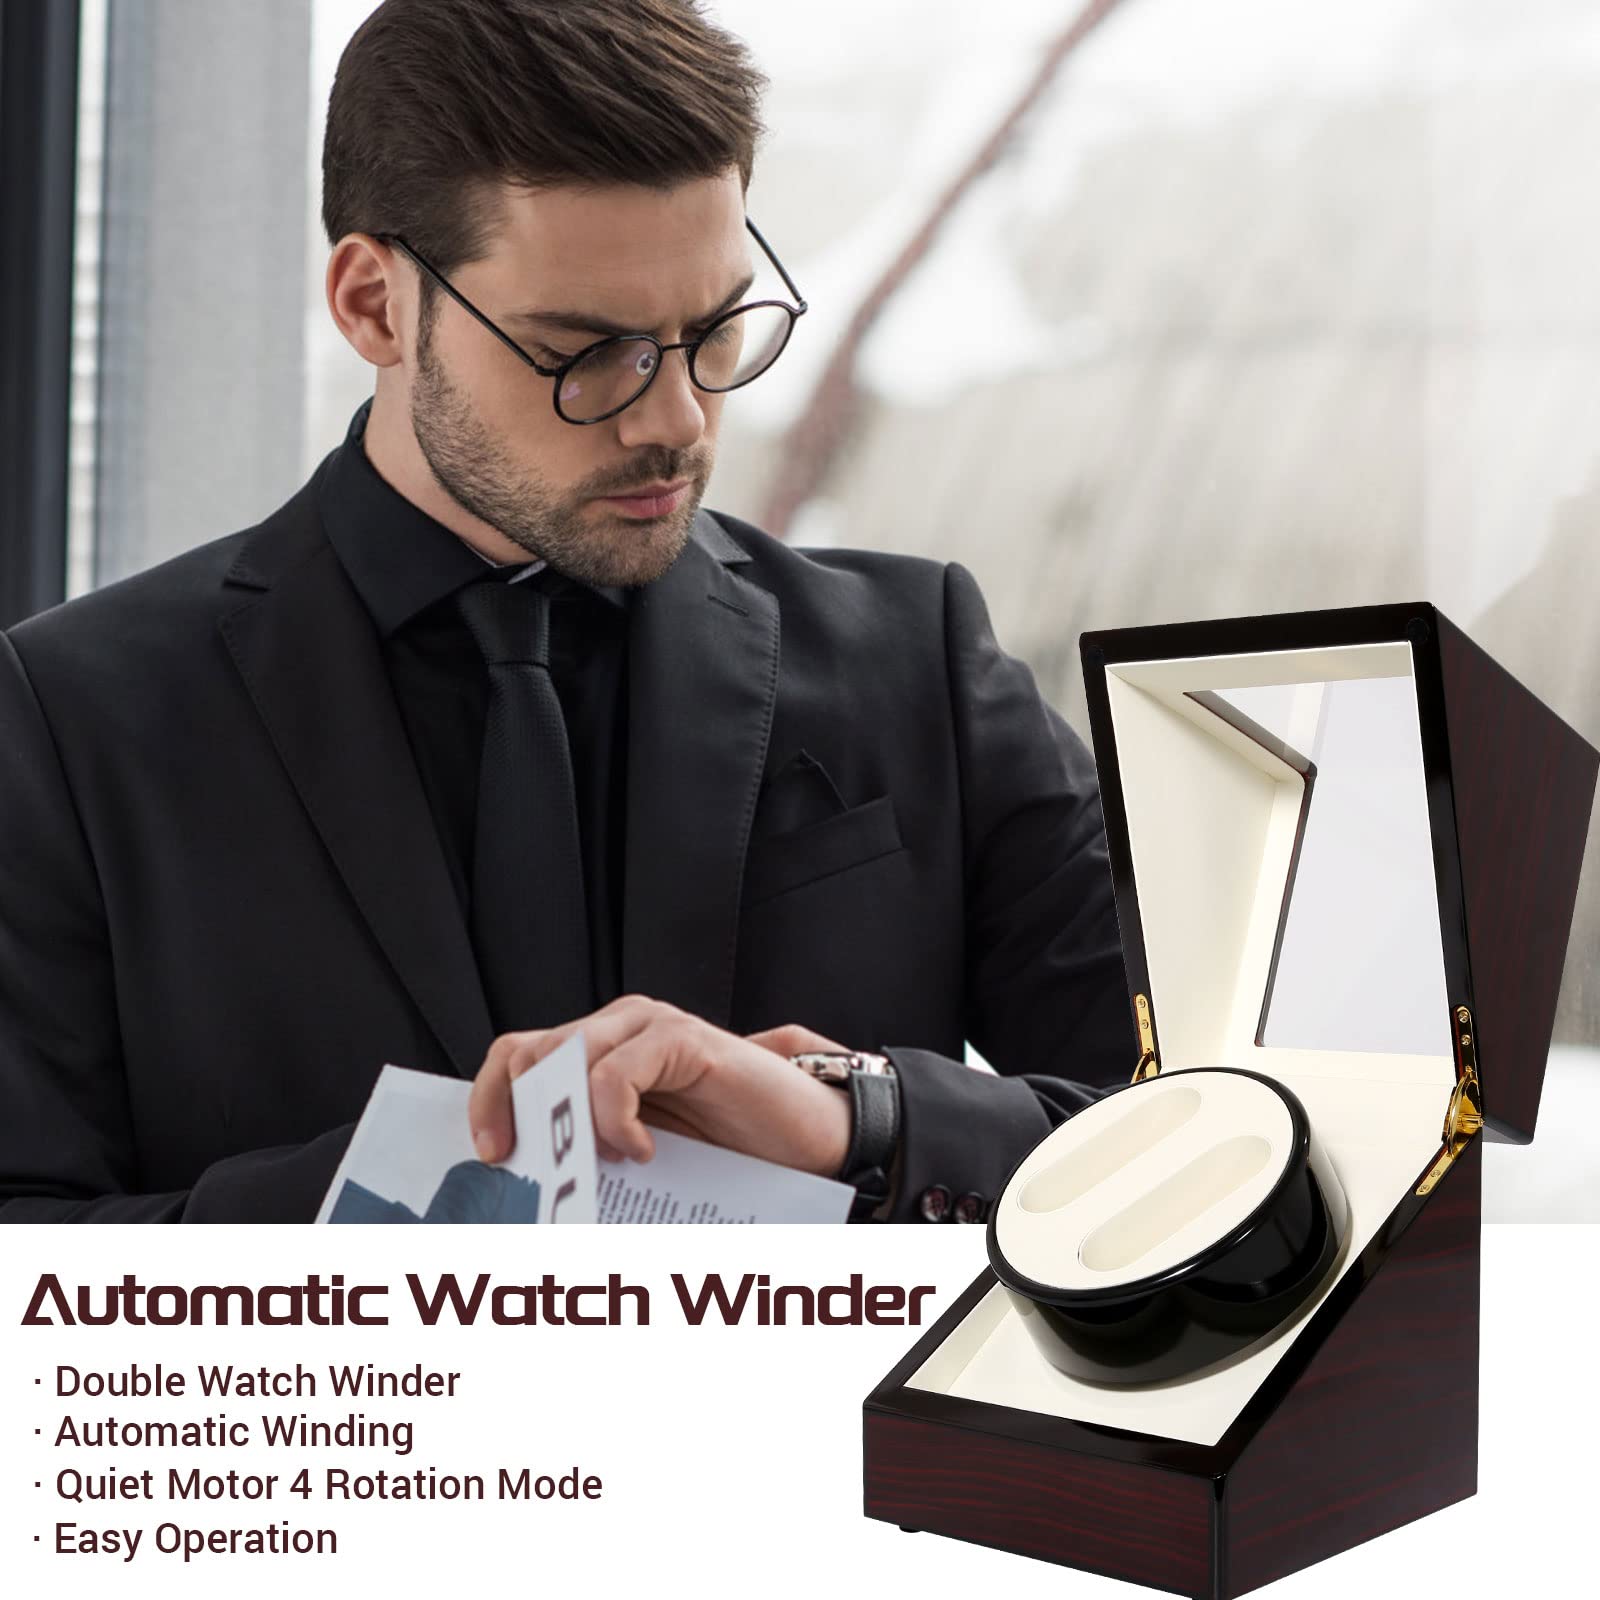 Uten Automatic Watch Winder Box Luxury Wooden Watch Storage Case, Double Watch Winder with Quiet Motor 4 Rotation Mode for Father's Day Gift for Him, Birthday Gift. Red